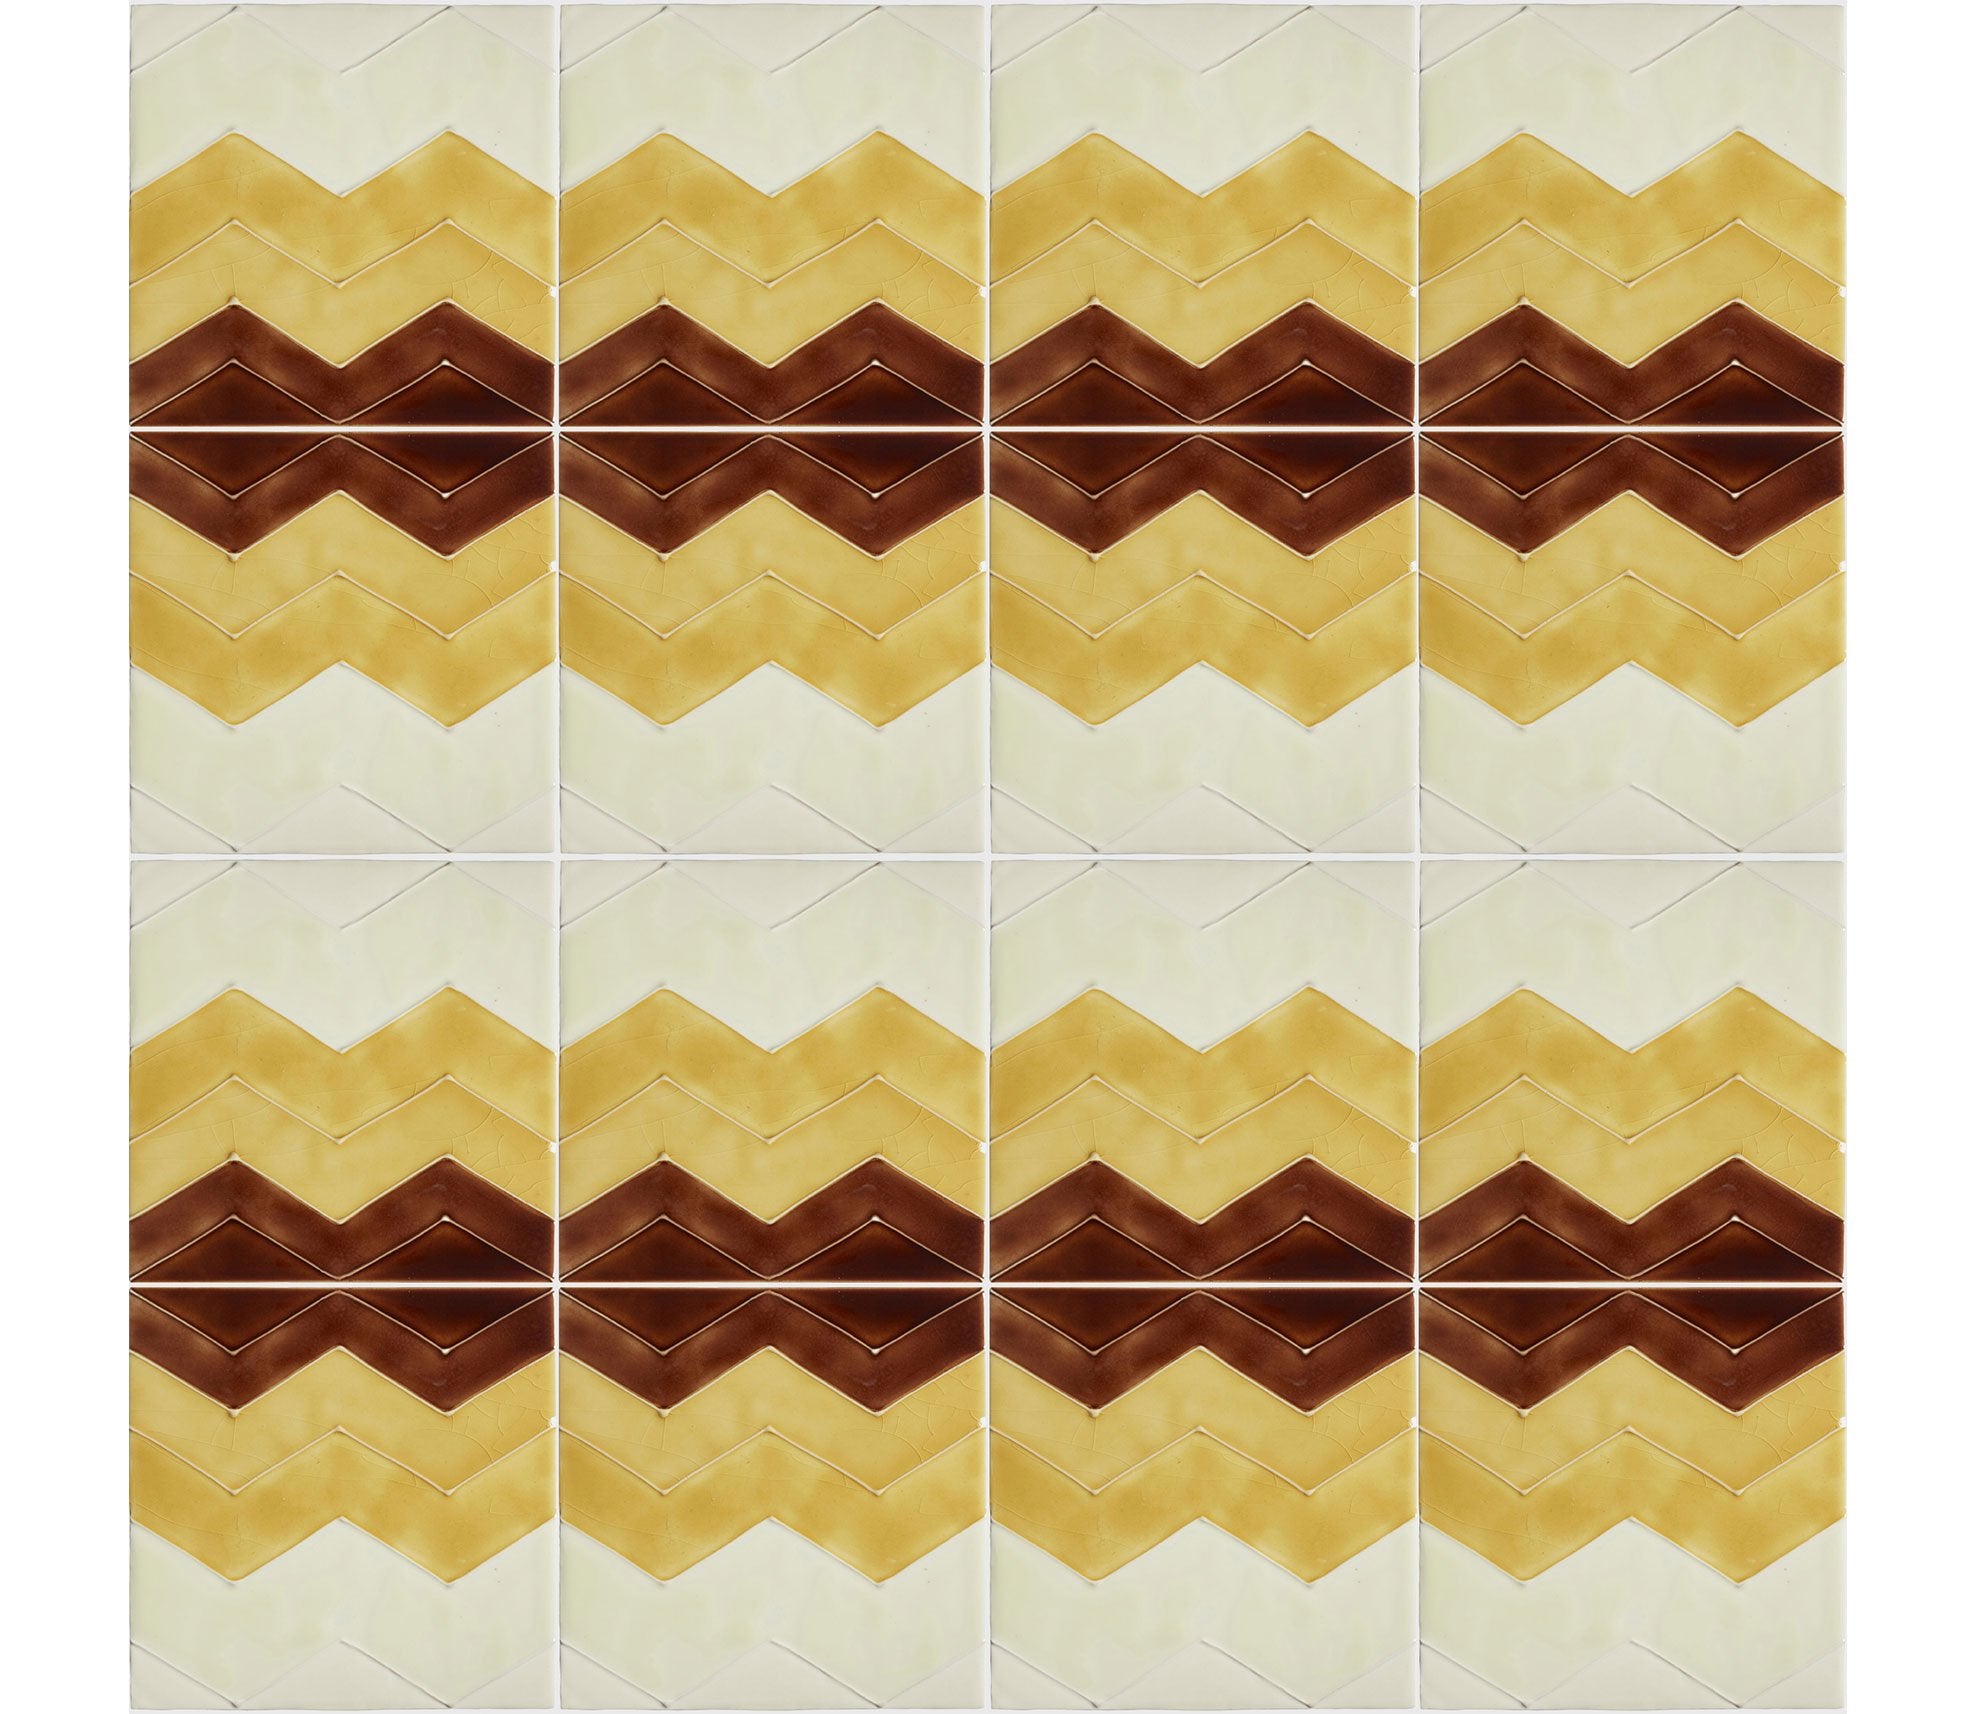 Hanley Tube Lined Decorative Tiles Product Image 46